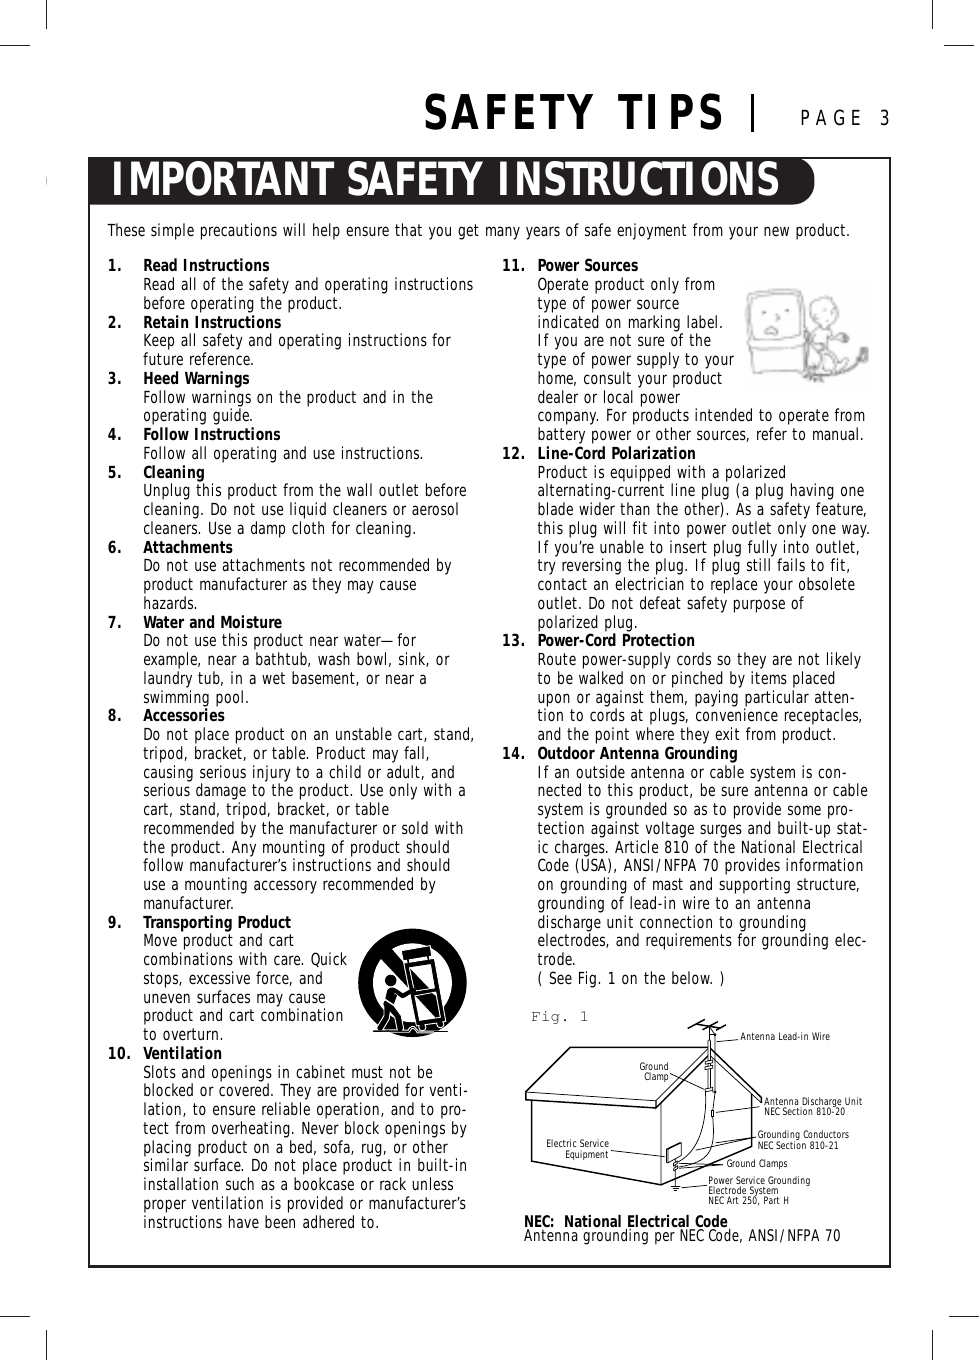 IMPORTANT SAFETY INSTRUCTIONSSAFETY TIPS PAGE 3These simple precautions will help ensure that you get many years of safe enjoyment from your new product.1. Read InstructionsRead all of the safety and operating instructionsbefore operating the product.2. Retain InstructionsKeep all safety and operating instructions forfuture reference.3. Heed WarningsFollow warnings on the product and in the operating guide.4. Follow InstructionsFollow all operating and use instructions.5. CleaningUnplug this product from the wall outlet before cleaning. Do not use liquid cleaners or aerosolcleaners. Use a damp cloth for cleaning.6. AttachmentsDo not use attachments not recommended byproduct manufacturer as they may cause hazards.7. Water and MoistureDo not use this product near water—for example, near a bathtub, wash bowl, sink, orlaundry tub, in a wet basement, or near a swimming pool.8. AccessoriesDo not place product on an unstable cart, stand, tripod, bracket, or table. Product may fall, causing serious injury to a child or adult, andserious damage to the product. Use only with acart, stand, tripod, bracket, or table recommended by the manufacturer or sold withthe product. Any mounting of product shouldfollow manufacturer’s instructions and shoulduse a mounting accessory recommended by manufacturer.9. Transporting ProductMove product and cart combinations with care. Quickstops, excessive force, anduneven surfaces may cause product and cart combinationto overturn.10. VentilationSlots and openings in cabinet must not beblocked or covered. They are provided for venti-lation, to ensure reliable operation, and to pro-tect from overheating. Never block openings byplacing product on a bed, sofa, rug, or othersimilar surface. Do not place product in built-ininstallation such as a bookcase or rack unlessproper ventilation is provided or manufacturer’sinstructions have been adhered to.11. Power Sources Operate product only fromtype of power source indicated on marking label.If you are not sure of thetype of power supply to yourhome, consult your productdealer or local power company. For products intended to operate frombattery power or other sources, refer to manual.12. Line-Cord PolarizationProduct is equipped with a polarized alternating-current line plug (a plug having oneblade wider than the other). As a safety feature,this plug will fit into power outlet only one way.If you’re unable to insert plug fully into outlet,try reversing the plug. If plug still fails to fit,contact an electrician to replace your obsoleteoutlet. Do not defeat safety purpose of polarized plug.13. Power-Cord ProtectionRoute power-supply cords so they are not likelyto be walked on or pinched by items placedupon or against them, paying particular atten-tion to cords at plugs, convenience receptacles,and the point where they exit from product.14. Outdoor Antenna GroundingIf an outside antenna or cable system is con-nected to this product, be sure antenna or cablesystem is grounded so as to provide some pro-tection against voltage surges and built-up stat-ic charges. Article 810 of the National ElectricalCode (USA), ANSI/NFPA 70 provides informationon grounding of mast and supporting structure,grounding of lead-in wire to an antenna discharge unit connection to grounding electrodes, and requirements for grounding elec-trode. ( See Fig. 1 on the below. )Antenna Lead-in WireAntenna Discharge UnitNEC Section 810-20 Grounding ConductorsNEC Section 810-21Ground ClampsPower Service Grounding Electrode System NEC Art 250, Part HGroundClampElectric ServiceEquipmentNEC:  National Electrical CodeAntenna grounding per NEC Code, ANSI/NFPA 70Fig. 1